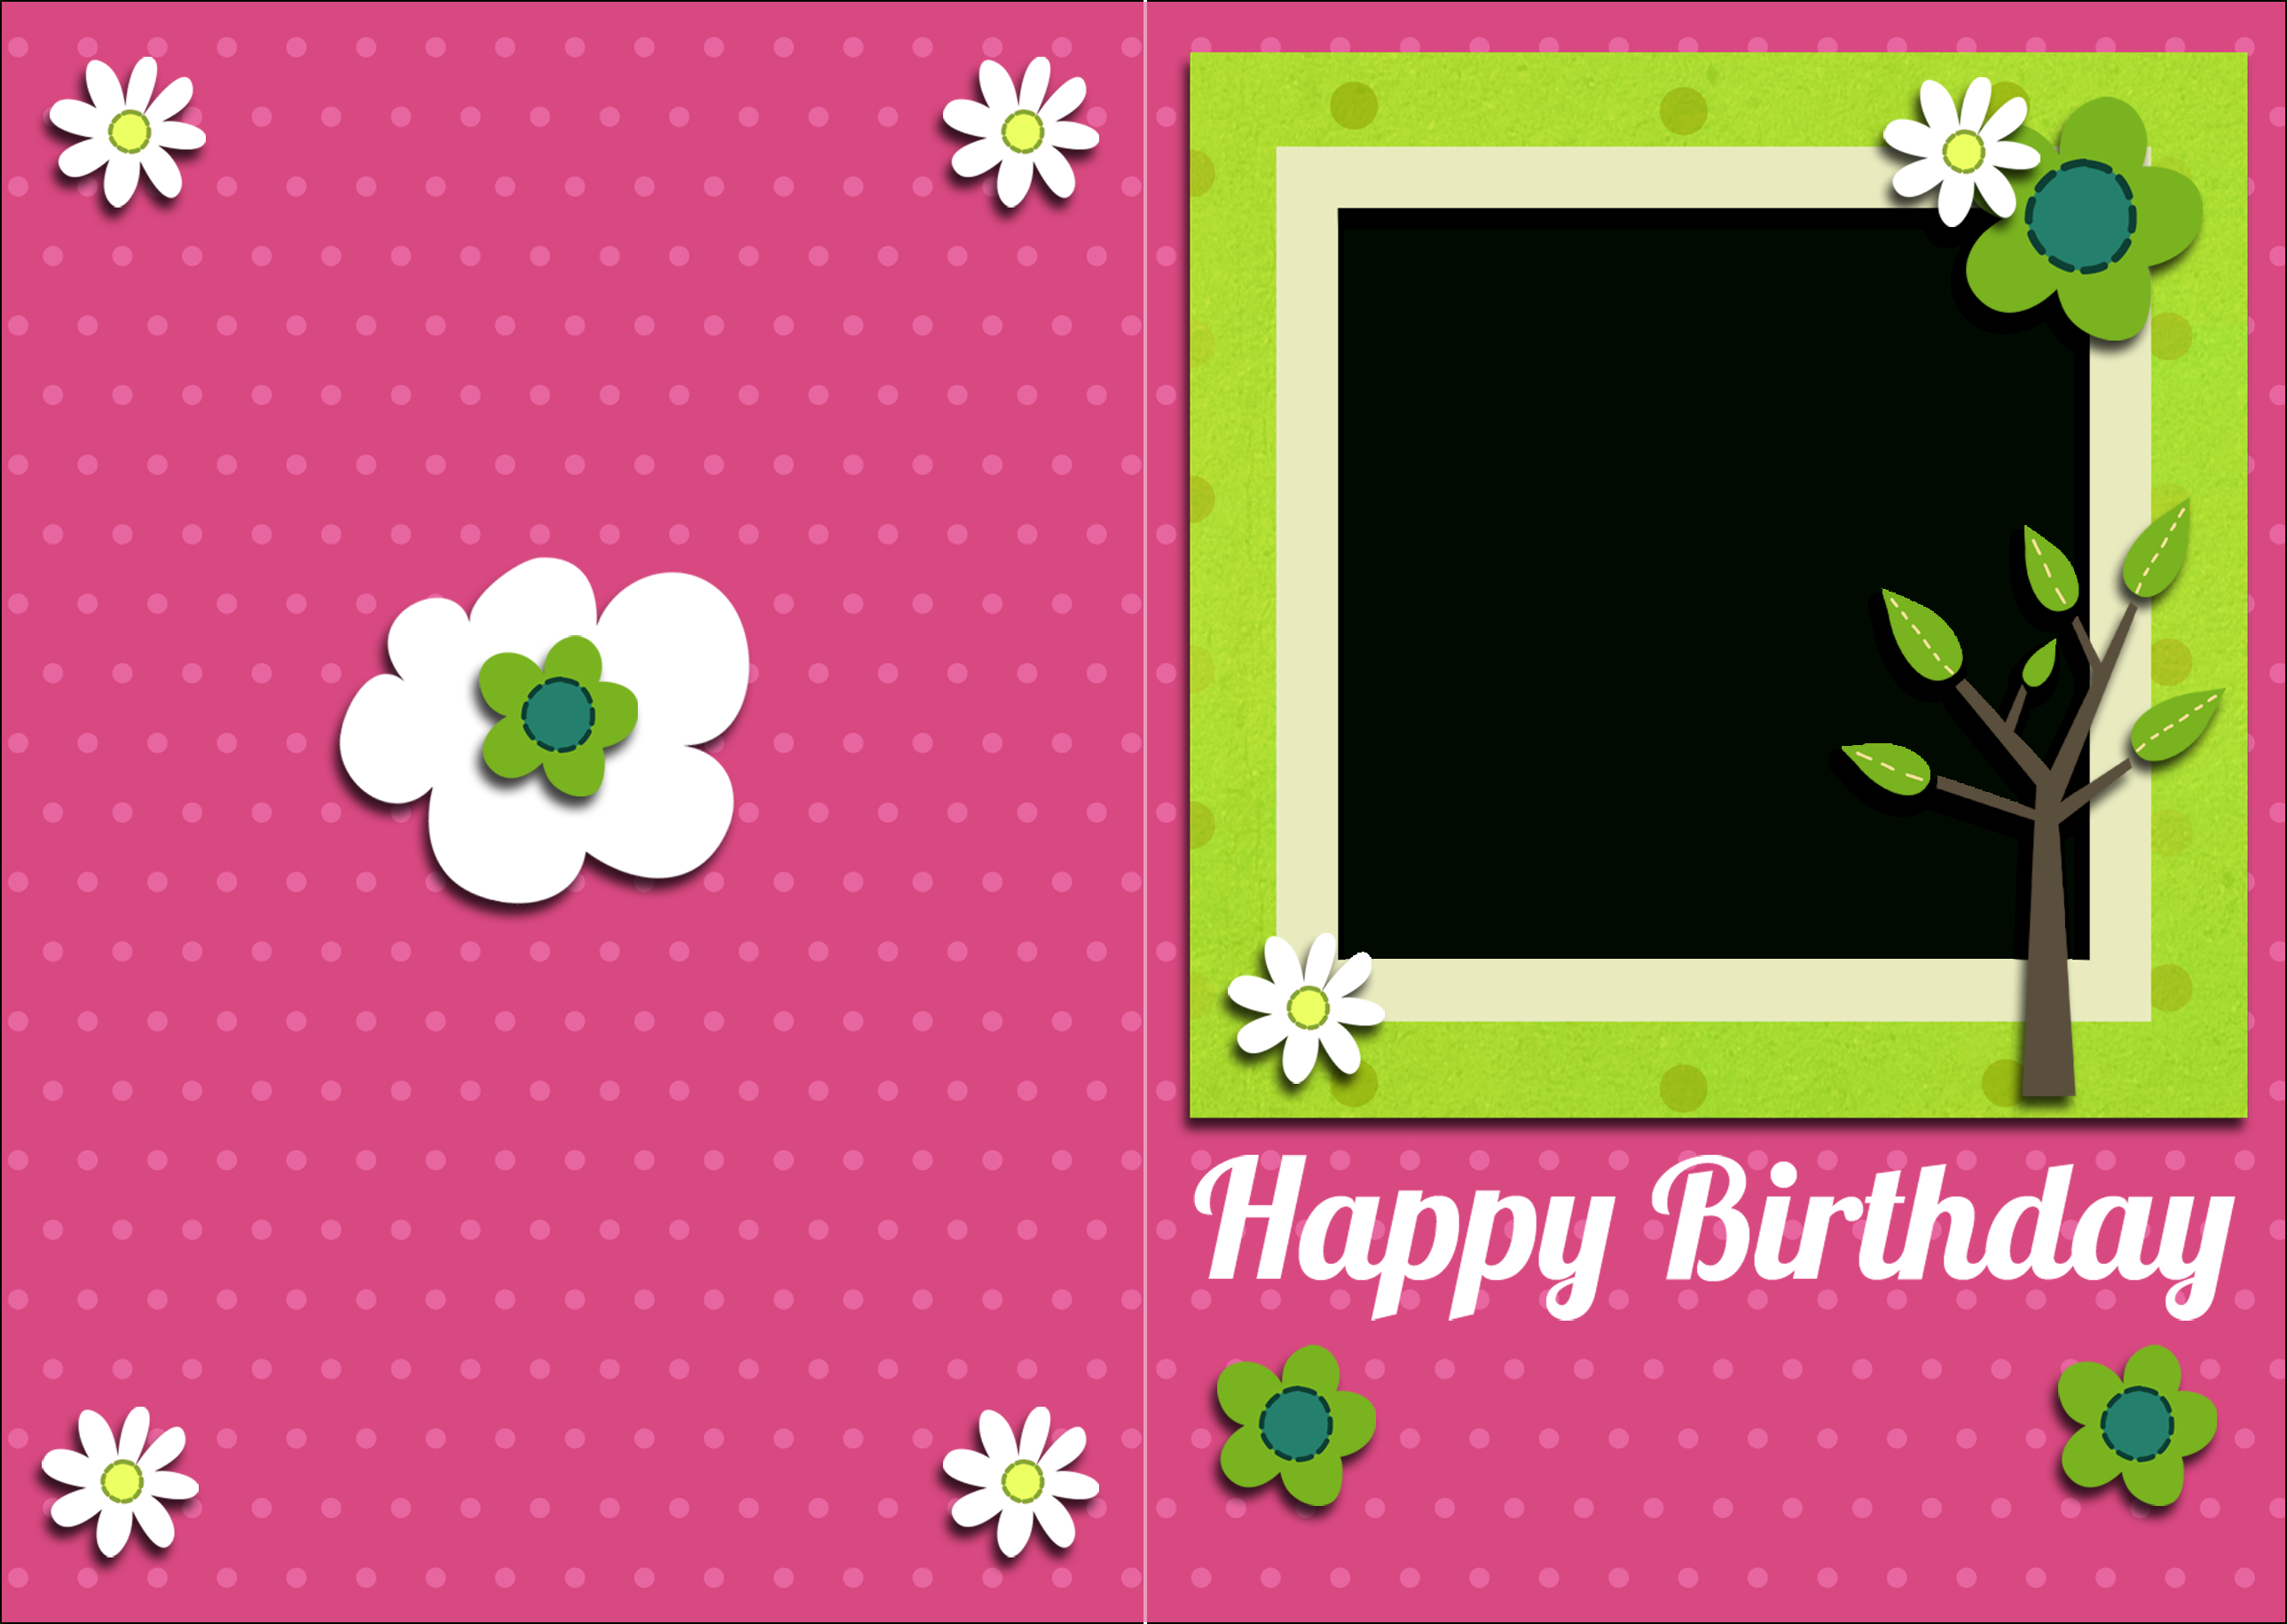 Printable Birthday Cards Hd Wallpapers Download Free Printable - Make Your Own Printable Birthday Cards Online Free